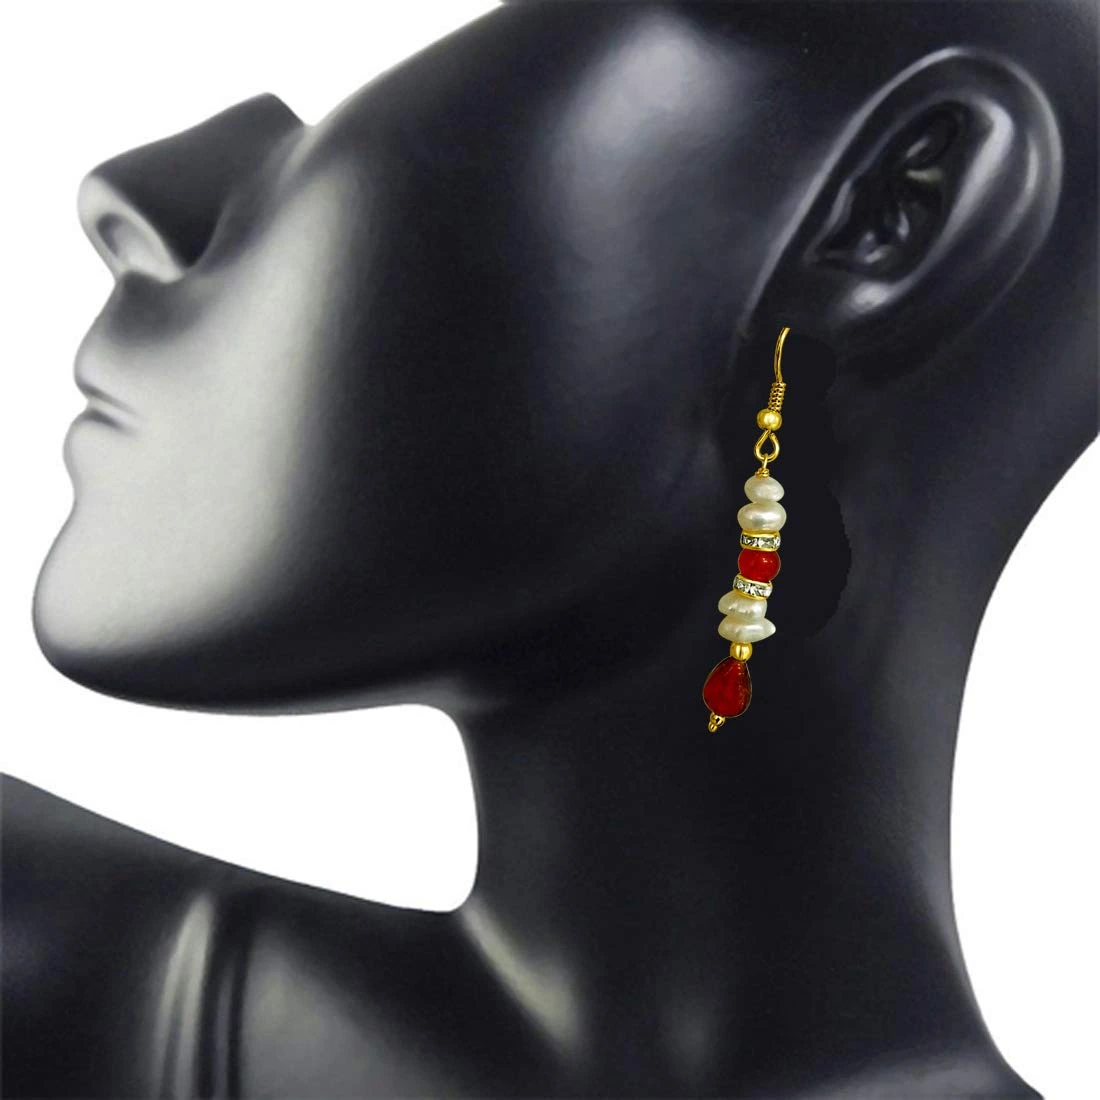 Real Freshwater Pearl & Drop Red Stone Hanging Earrings for Women (SE196)